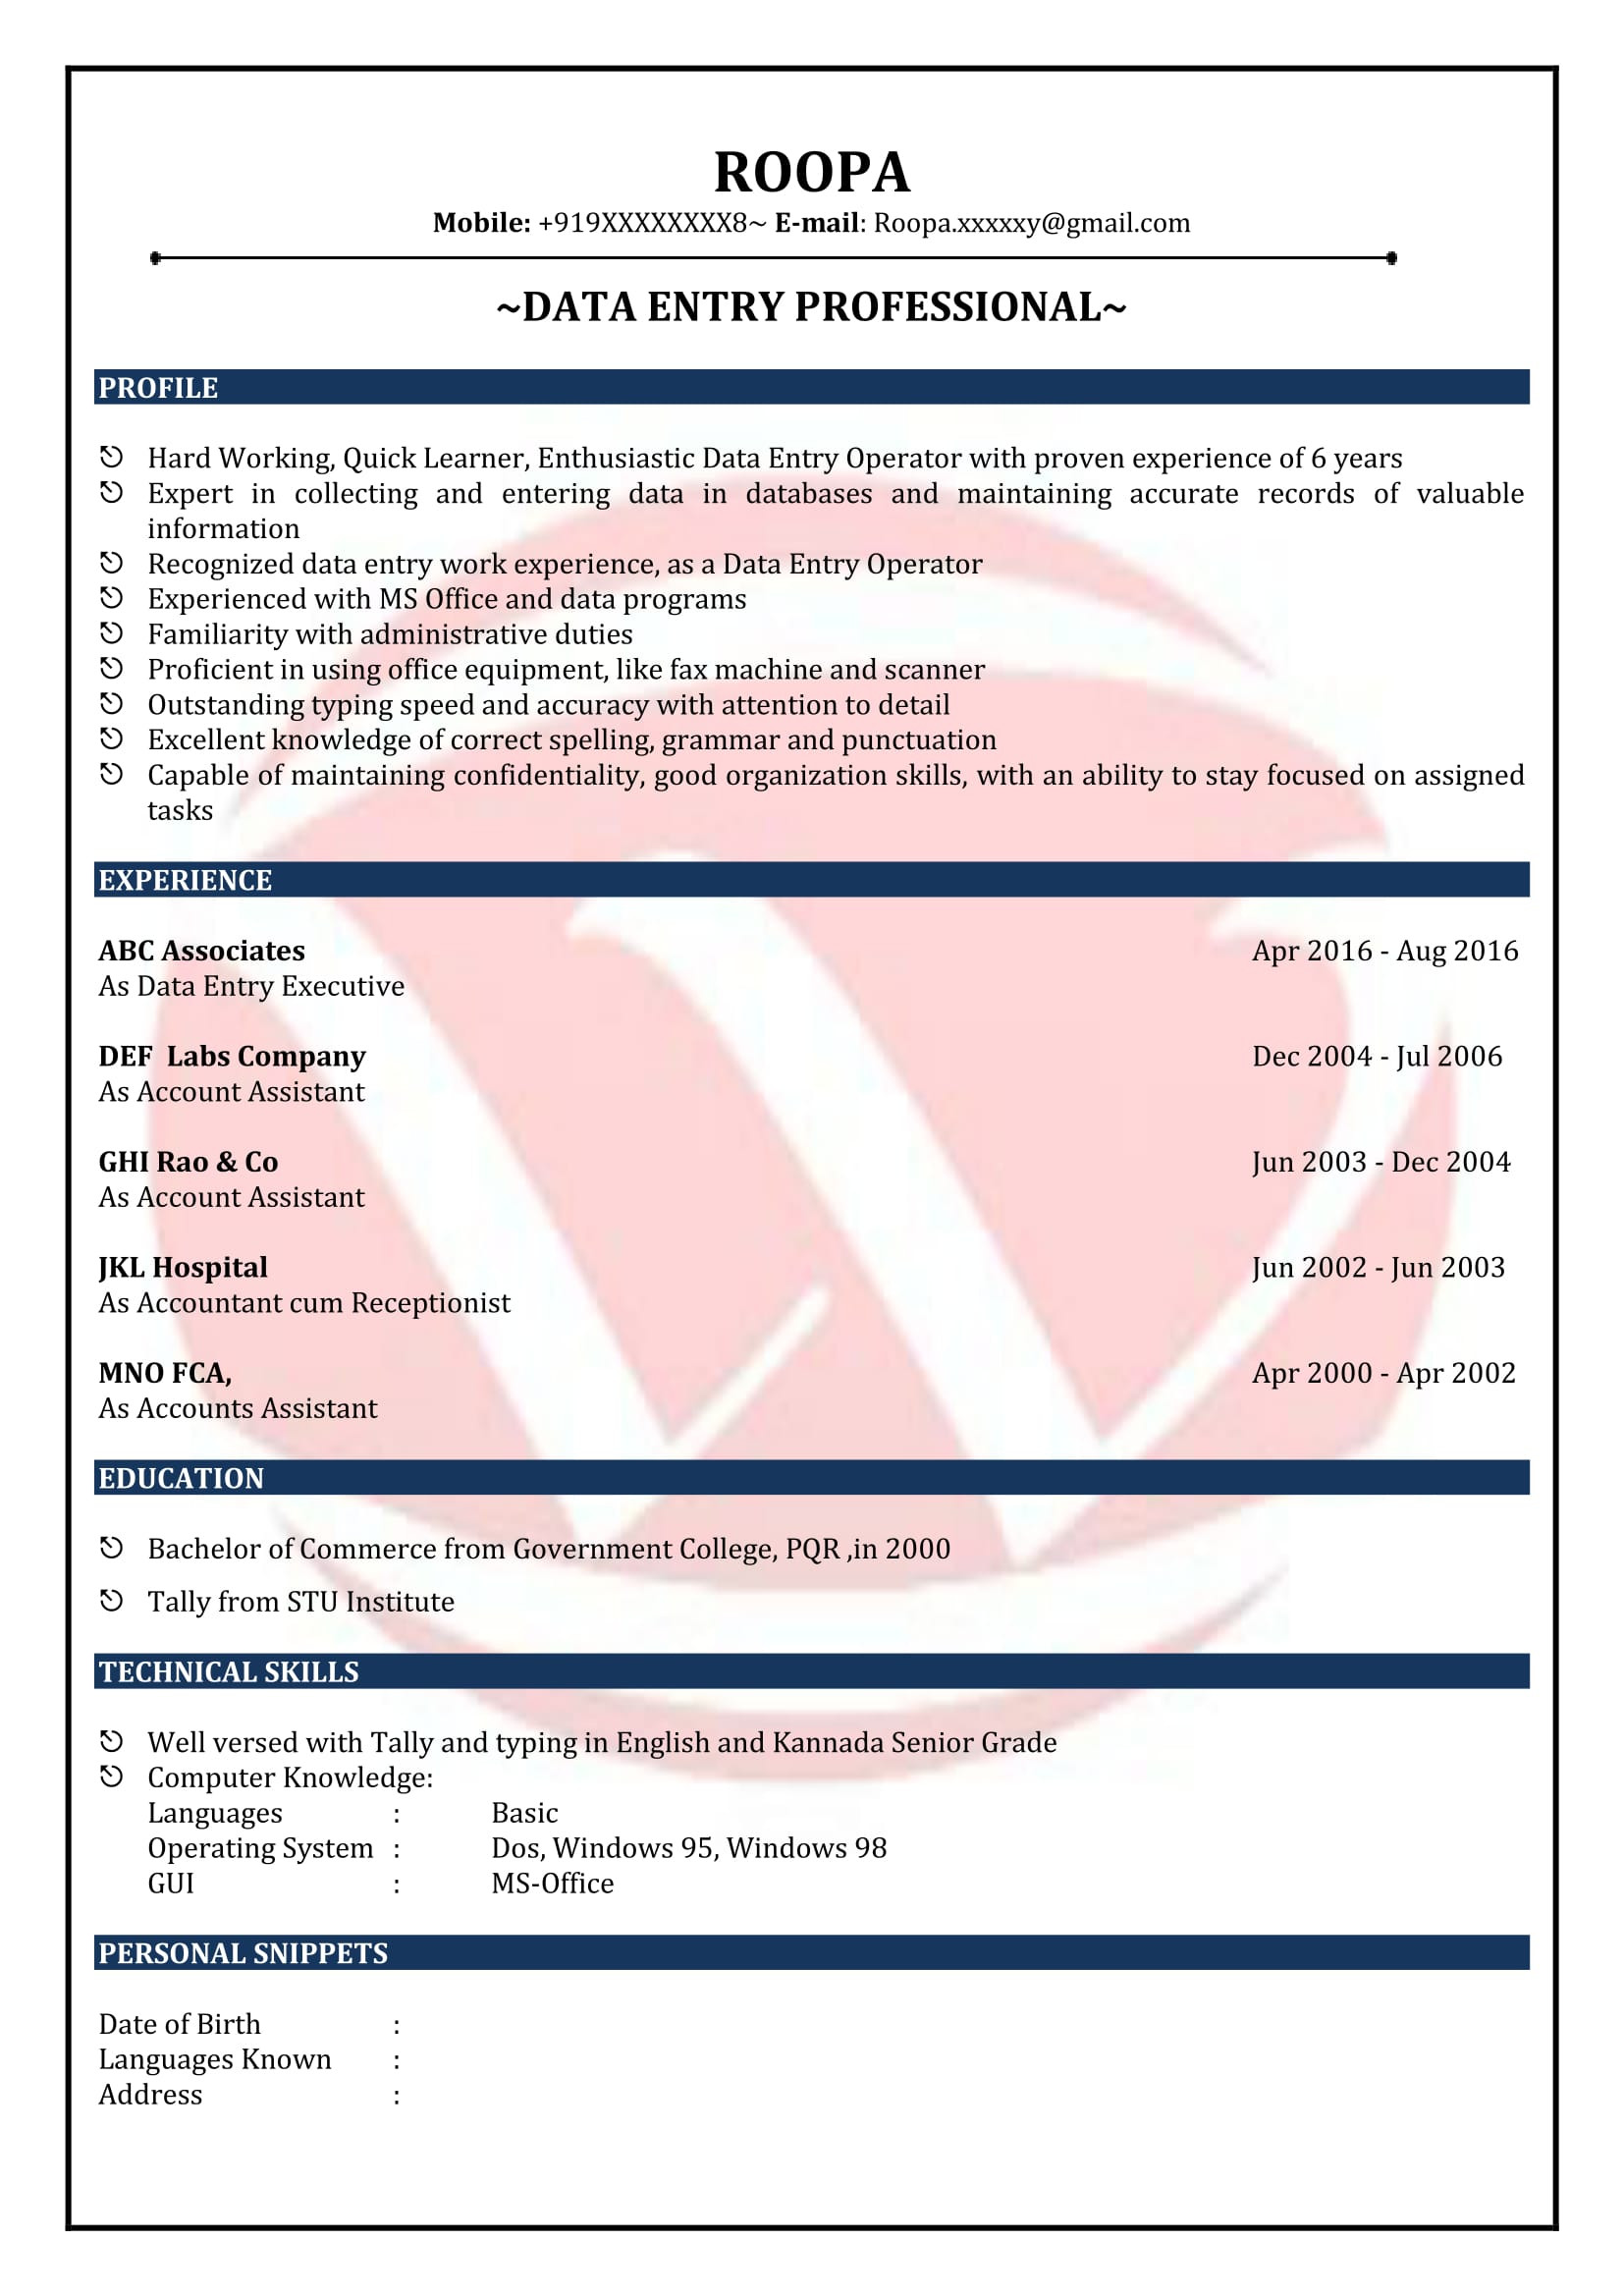 Resume Samples for Data Entry Jobs Data Entry Sample Resumes, Download Resume format Templates!